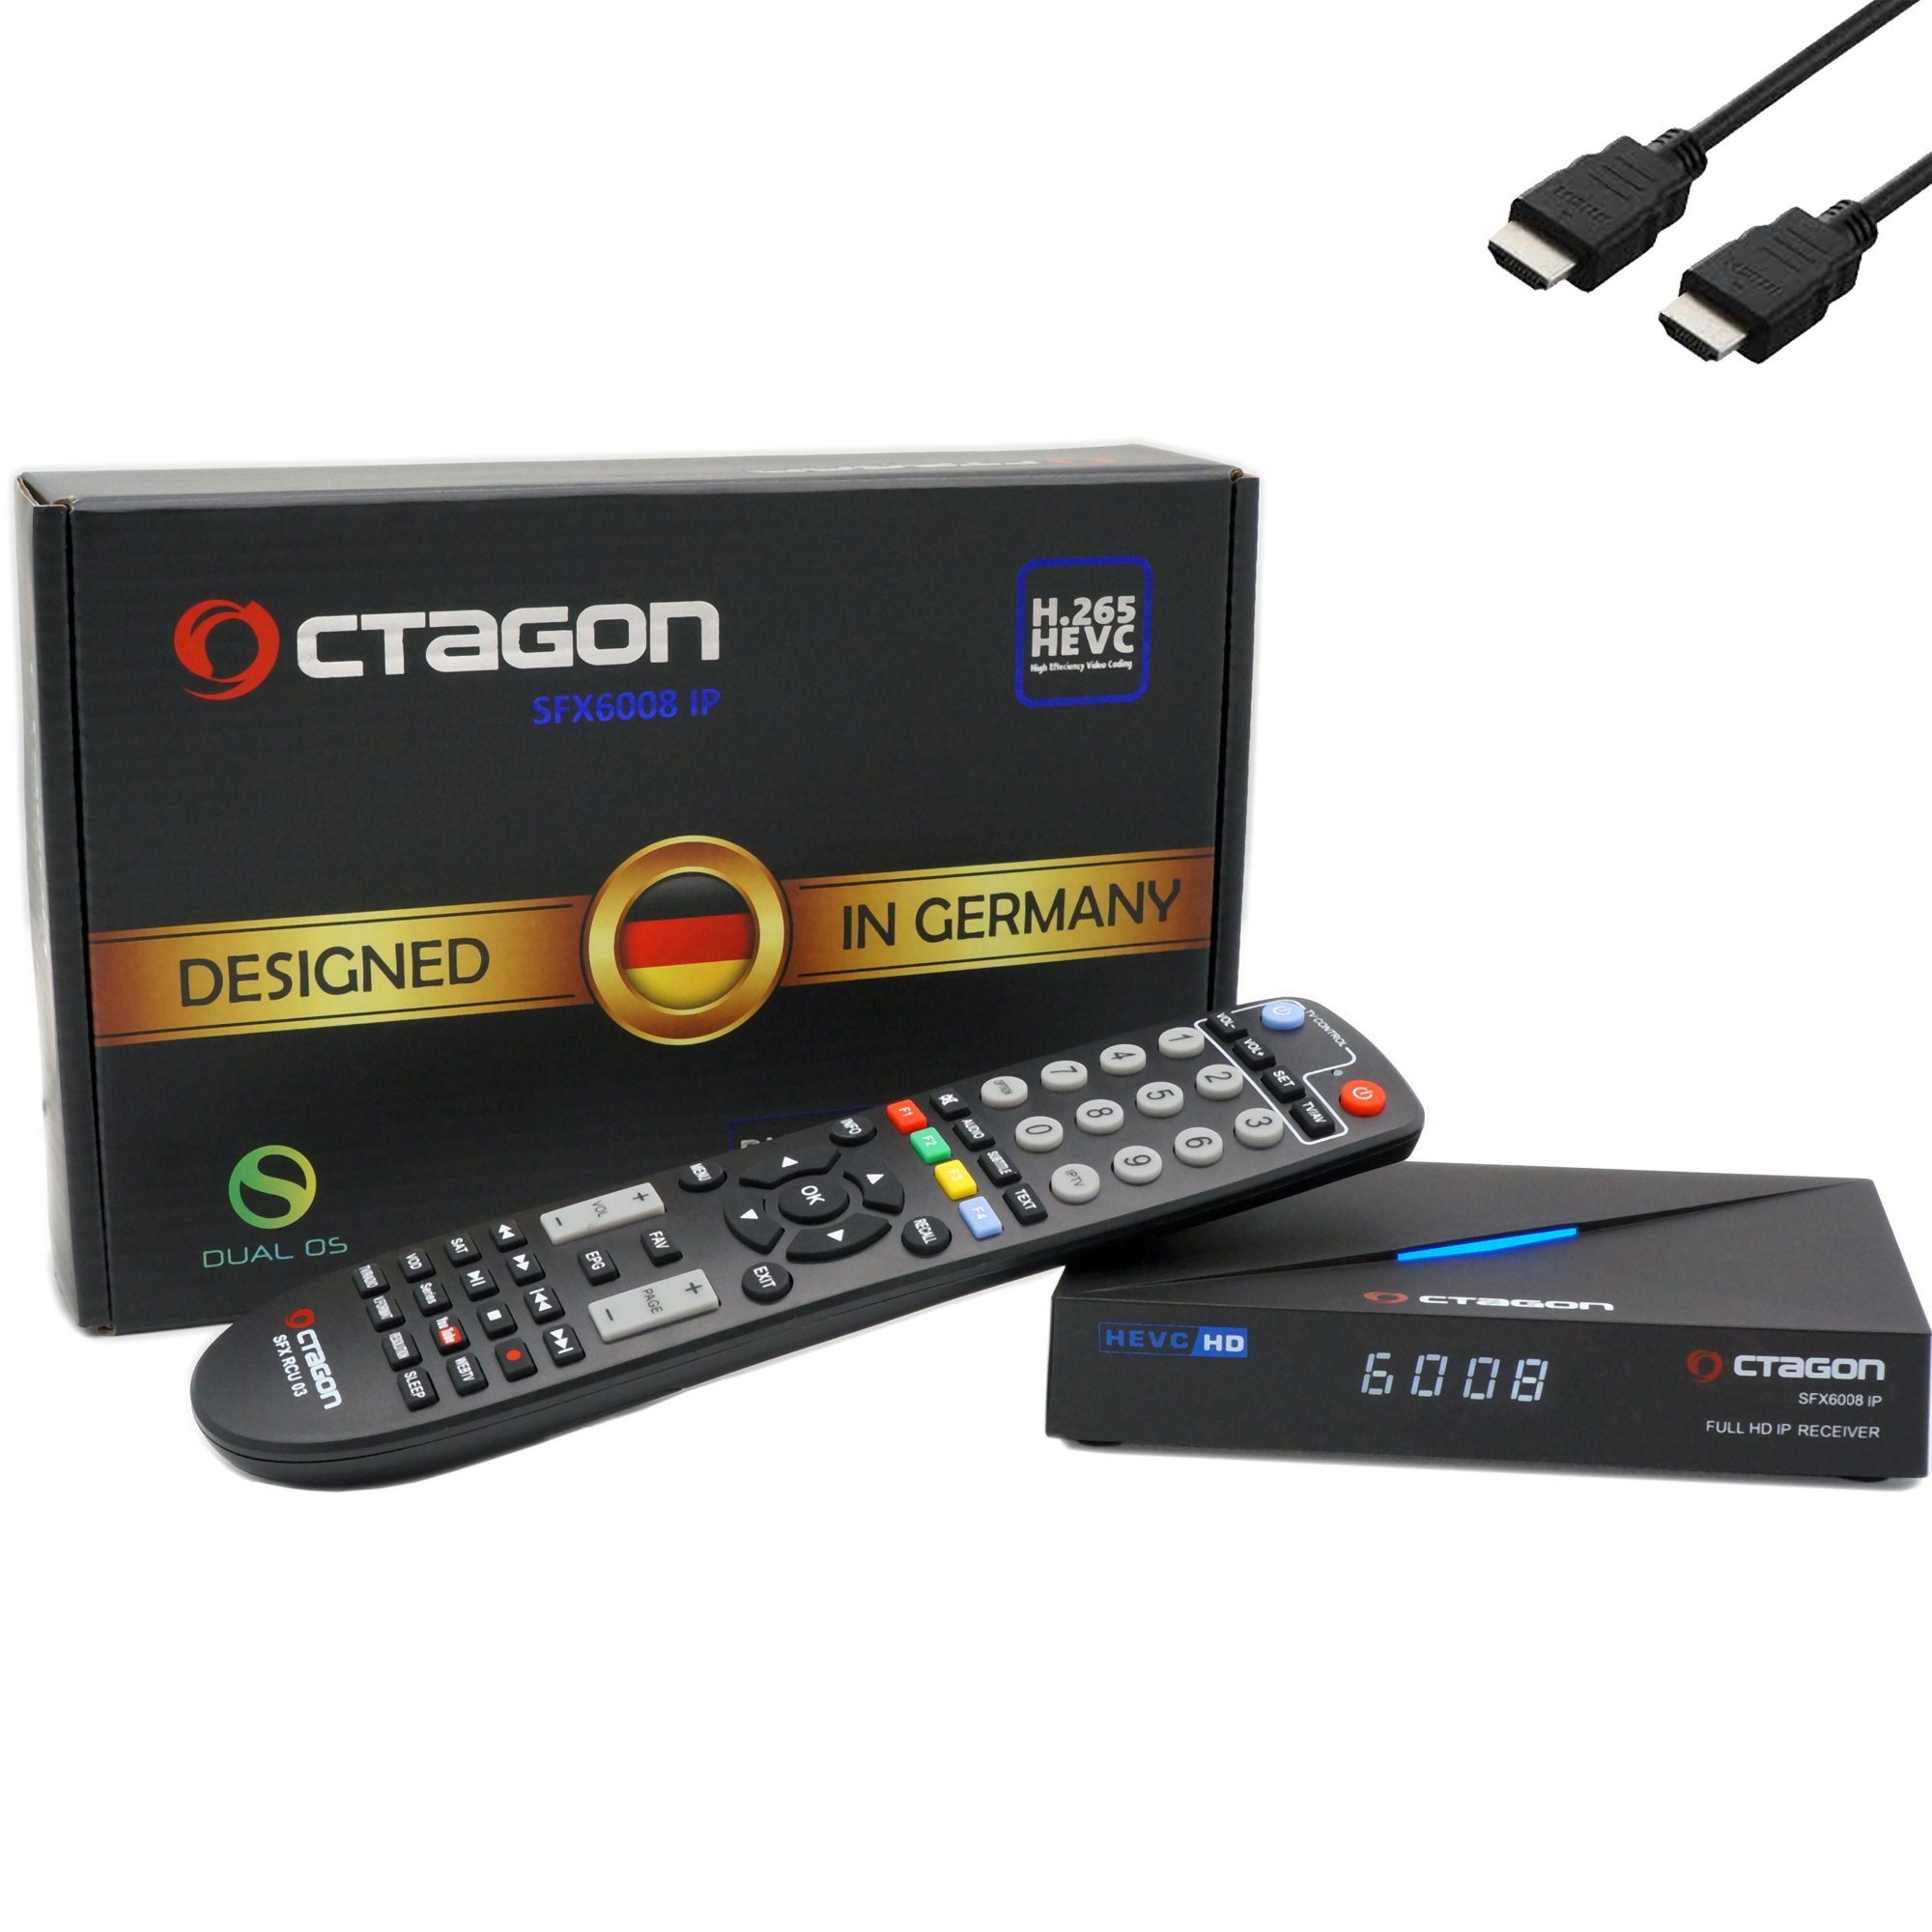 Smart Sat HD IPTV - H.265 IP Streaming-Box Linux SFX6008 IP OCTAGON Receiver to HEVC E2 mit